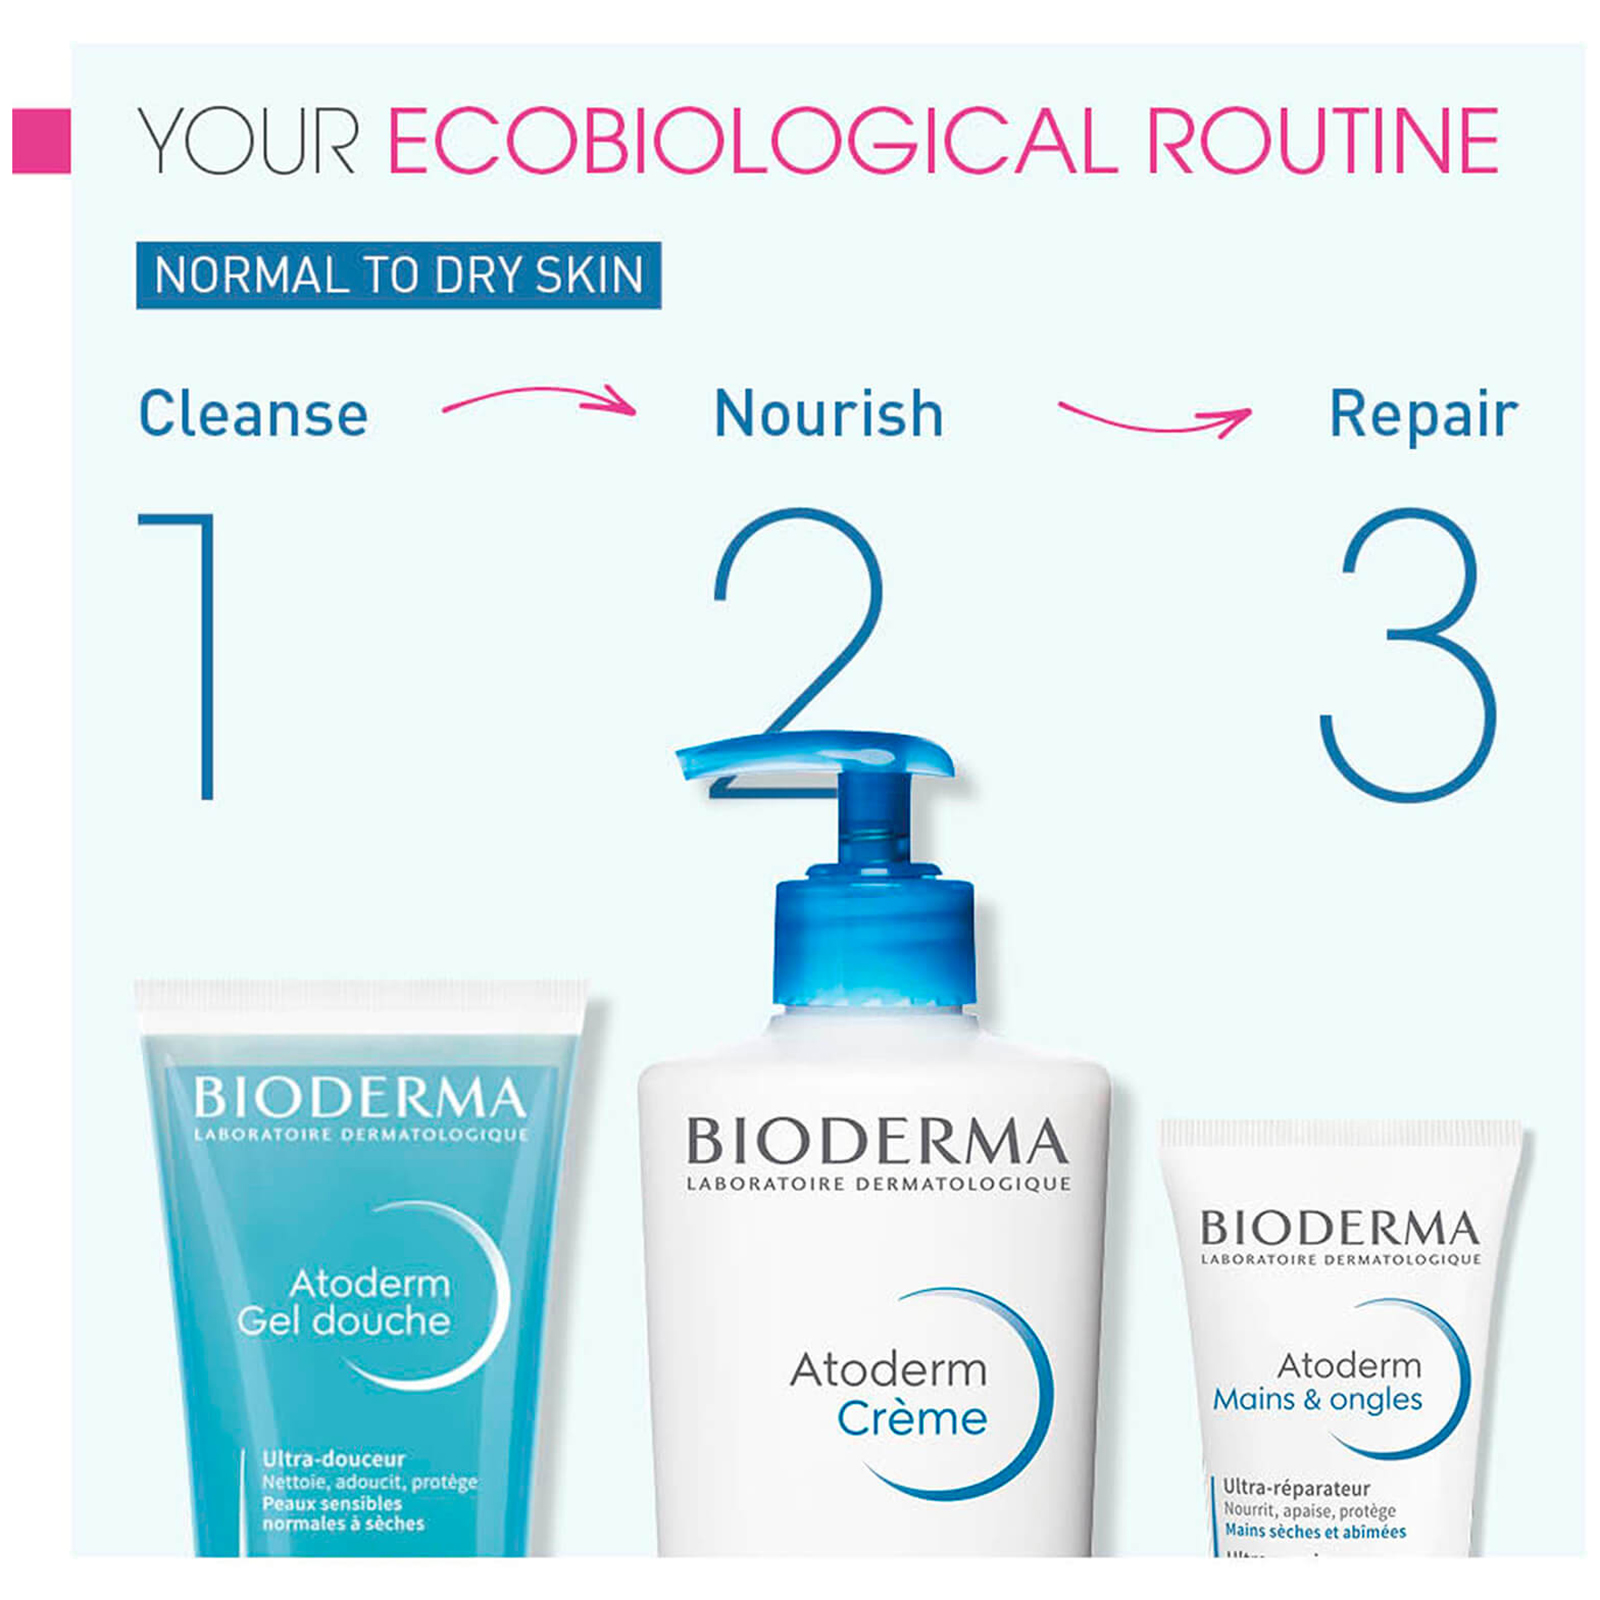 Your ecobiological routine